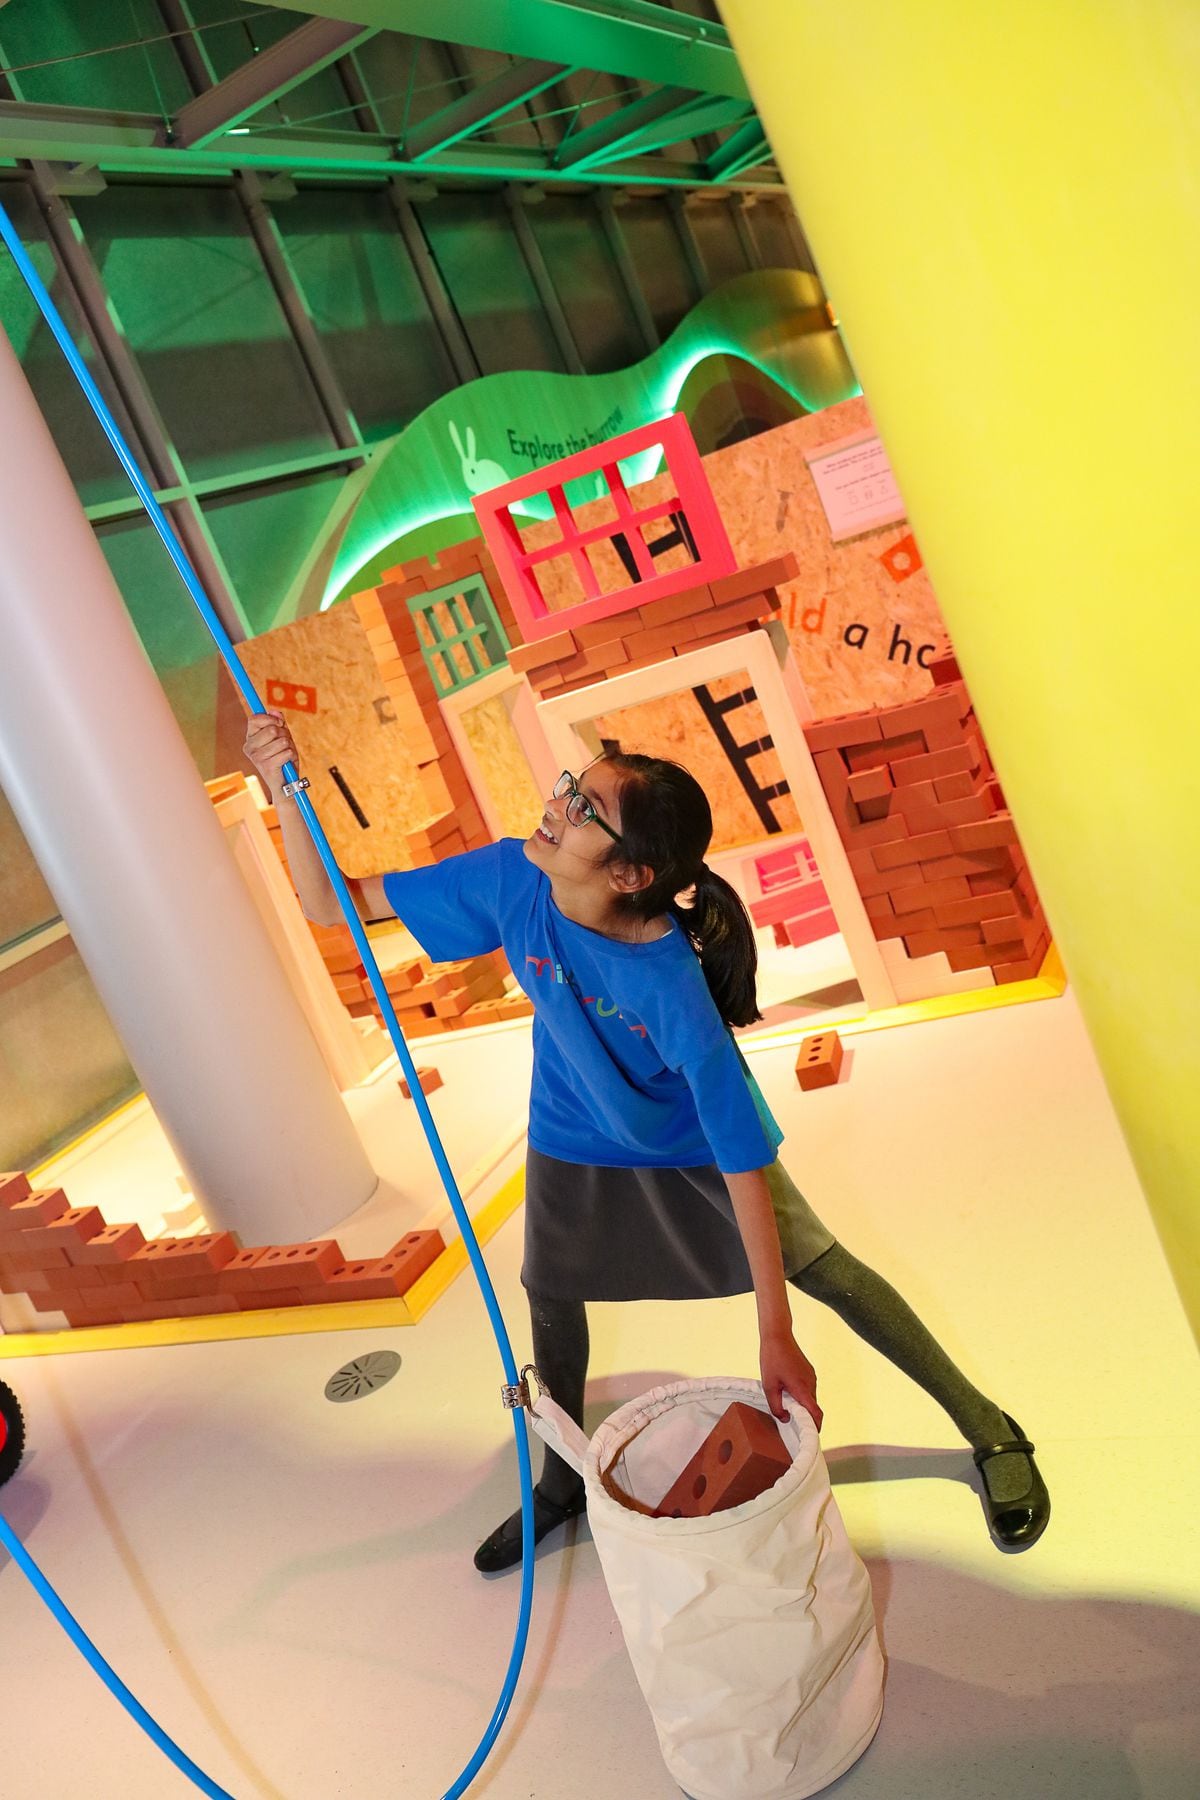 ThinkTank Birmingham opens new MiniBrum attraction - with pictures